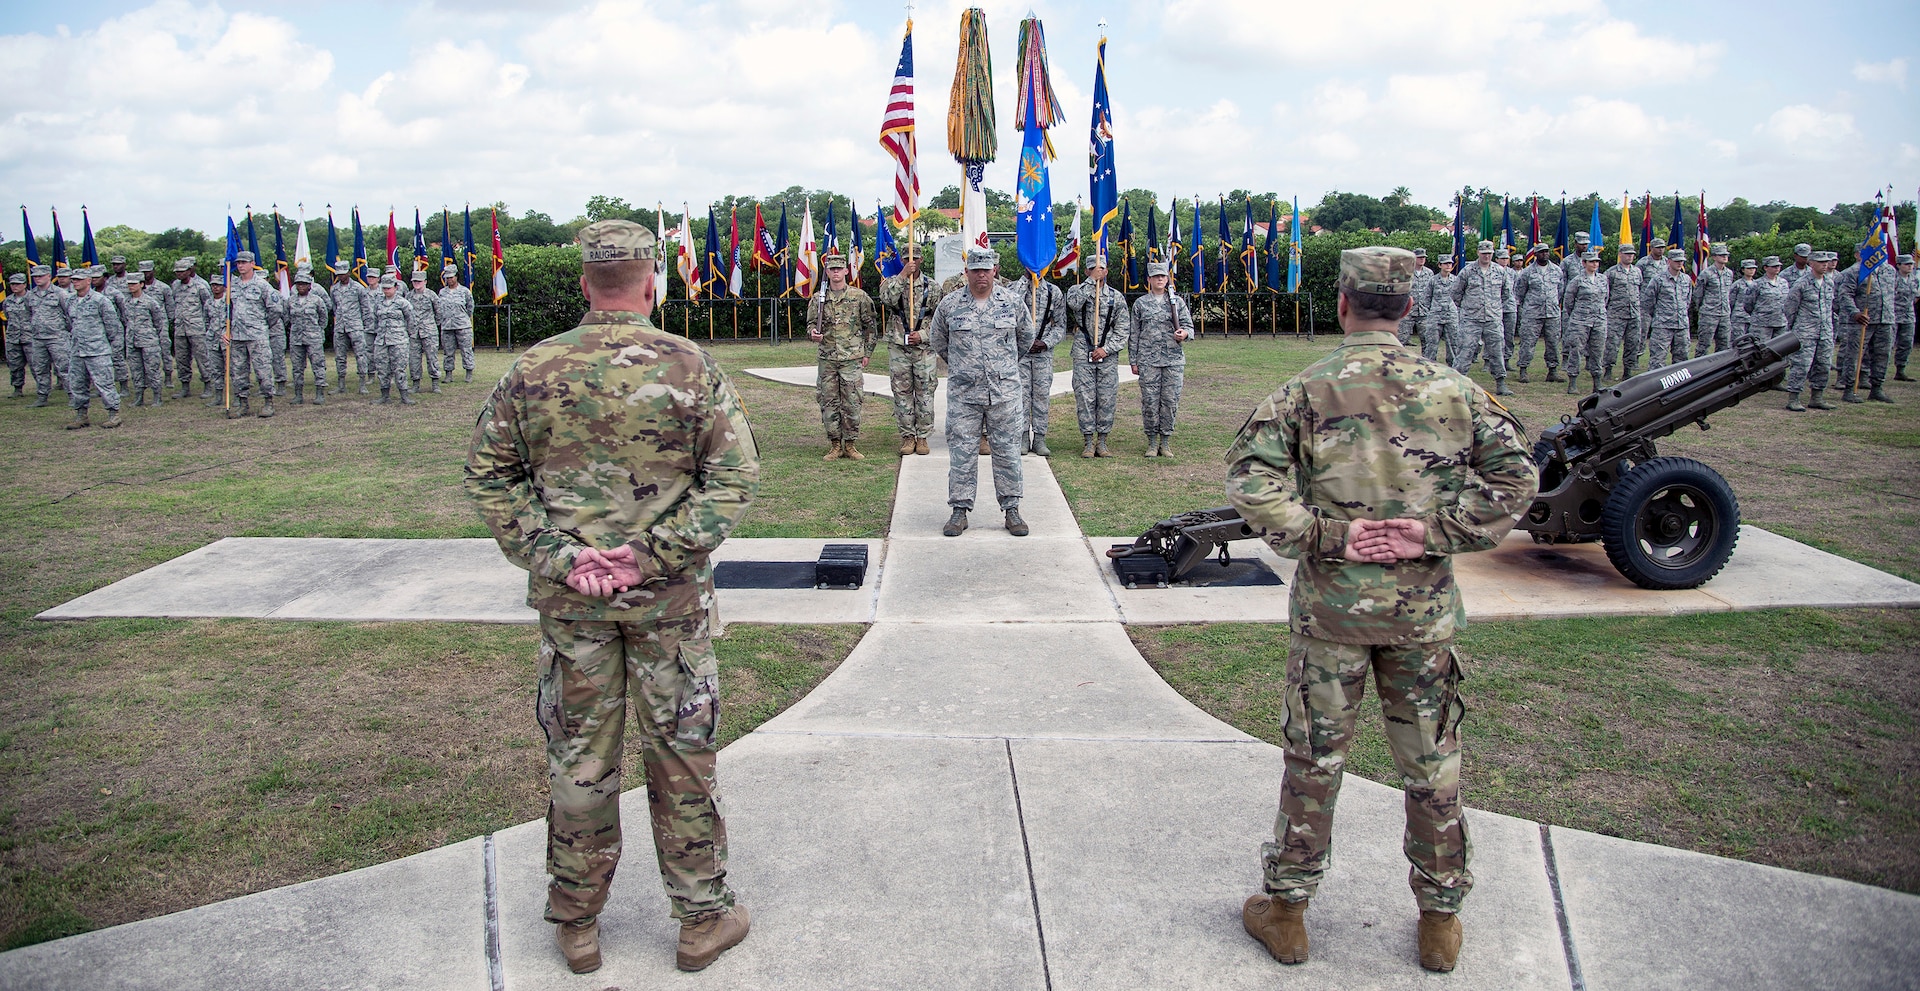 Col. David L. Raugh (left) and Col. Samuel E. Fiol (right) stand at parade rest during the 502nd Force Support Group change of command ceremony held at the JBSA-Fort Sam Houston base flagpole July 11. Raugh turned over command of the group to Fiol during the ceremony.